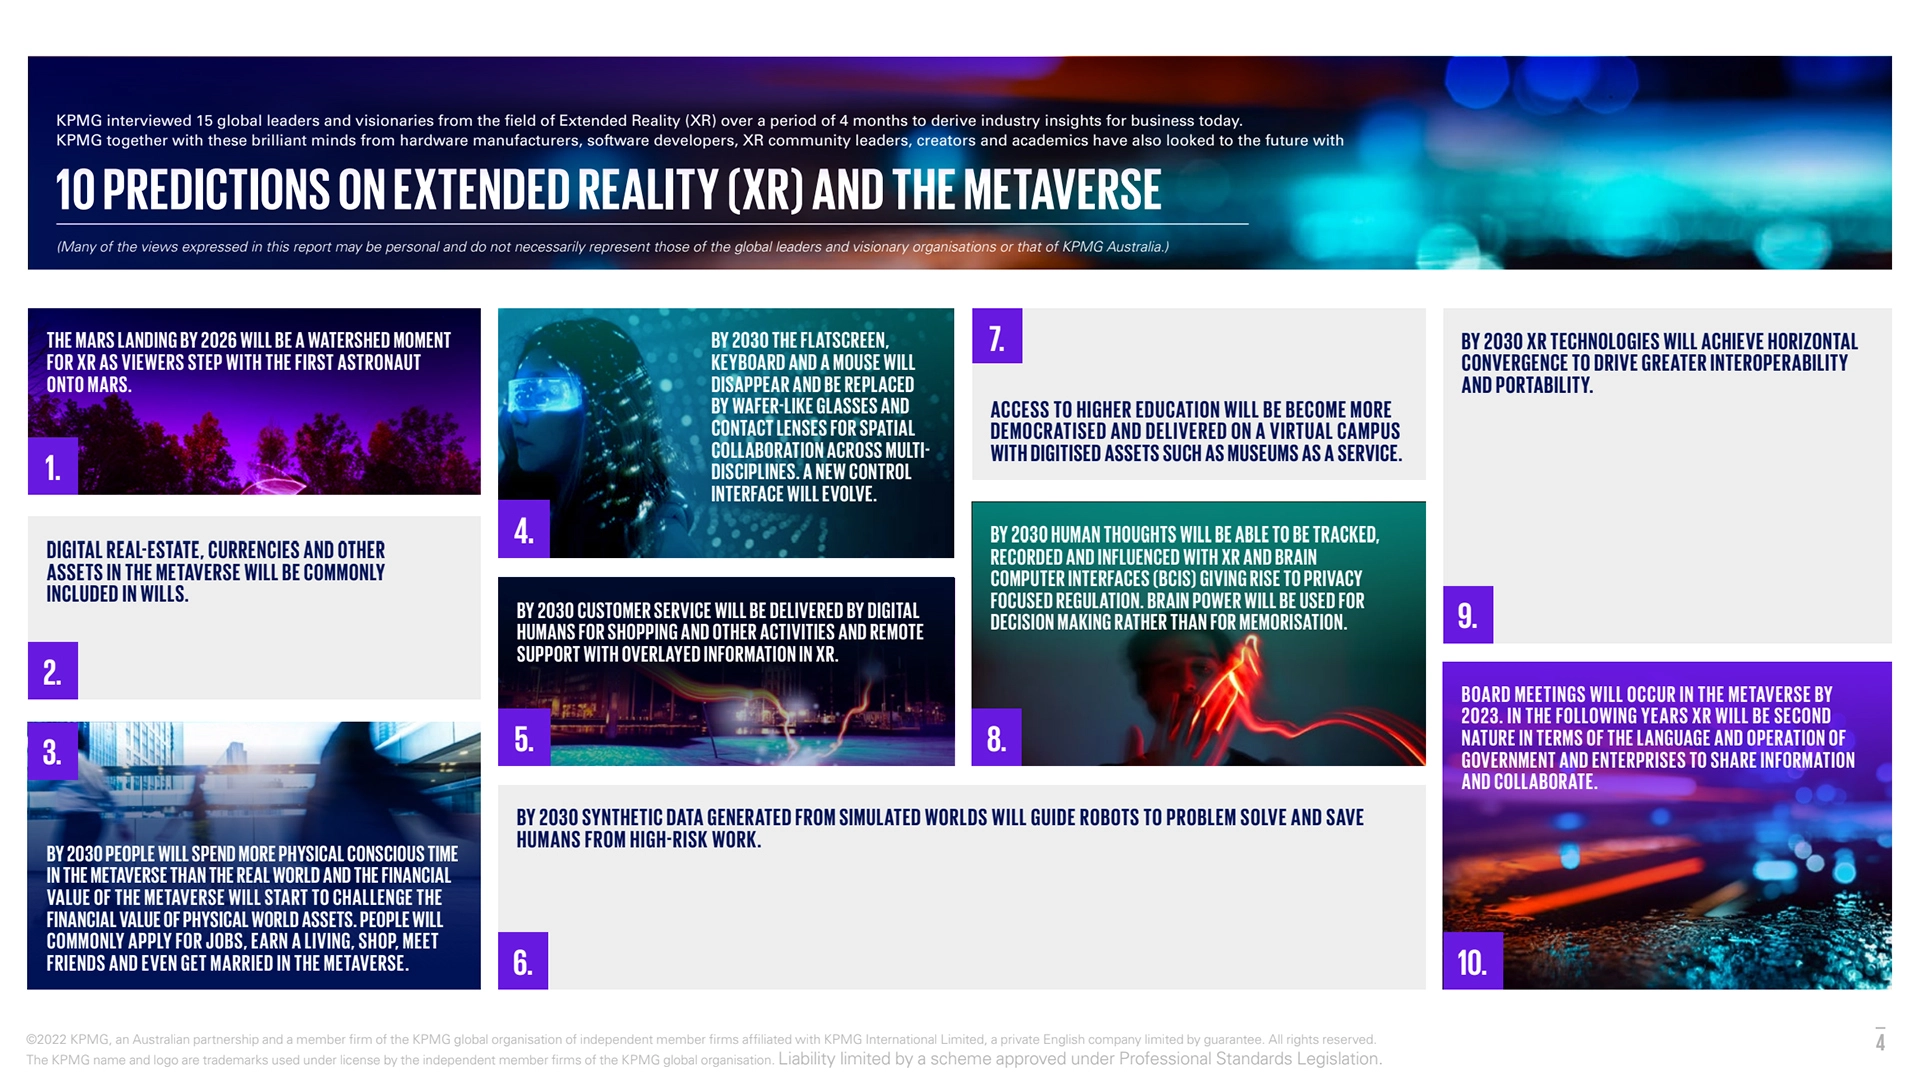 Livre blanc KPMG The future of metaverse and Extended reality - 10 prédictions